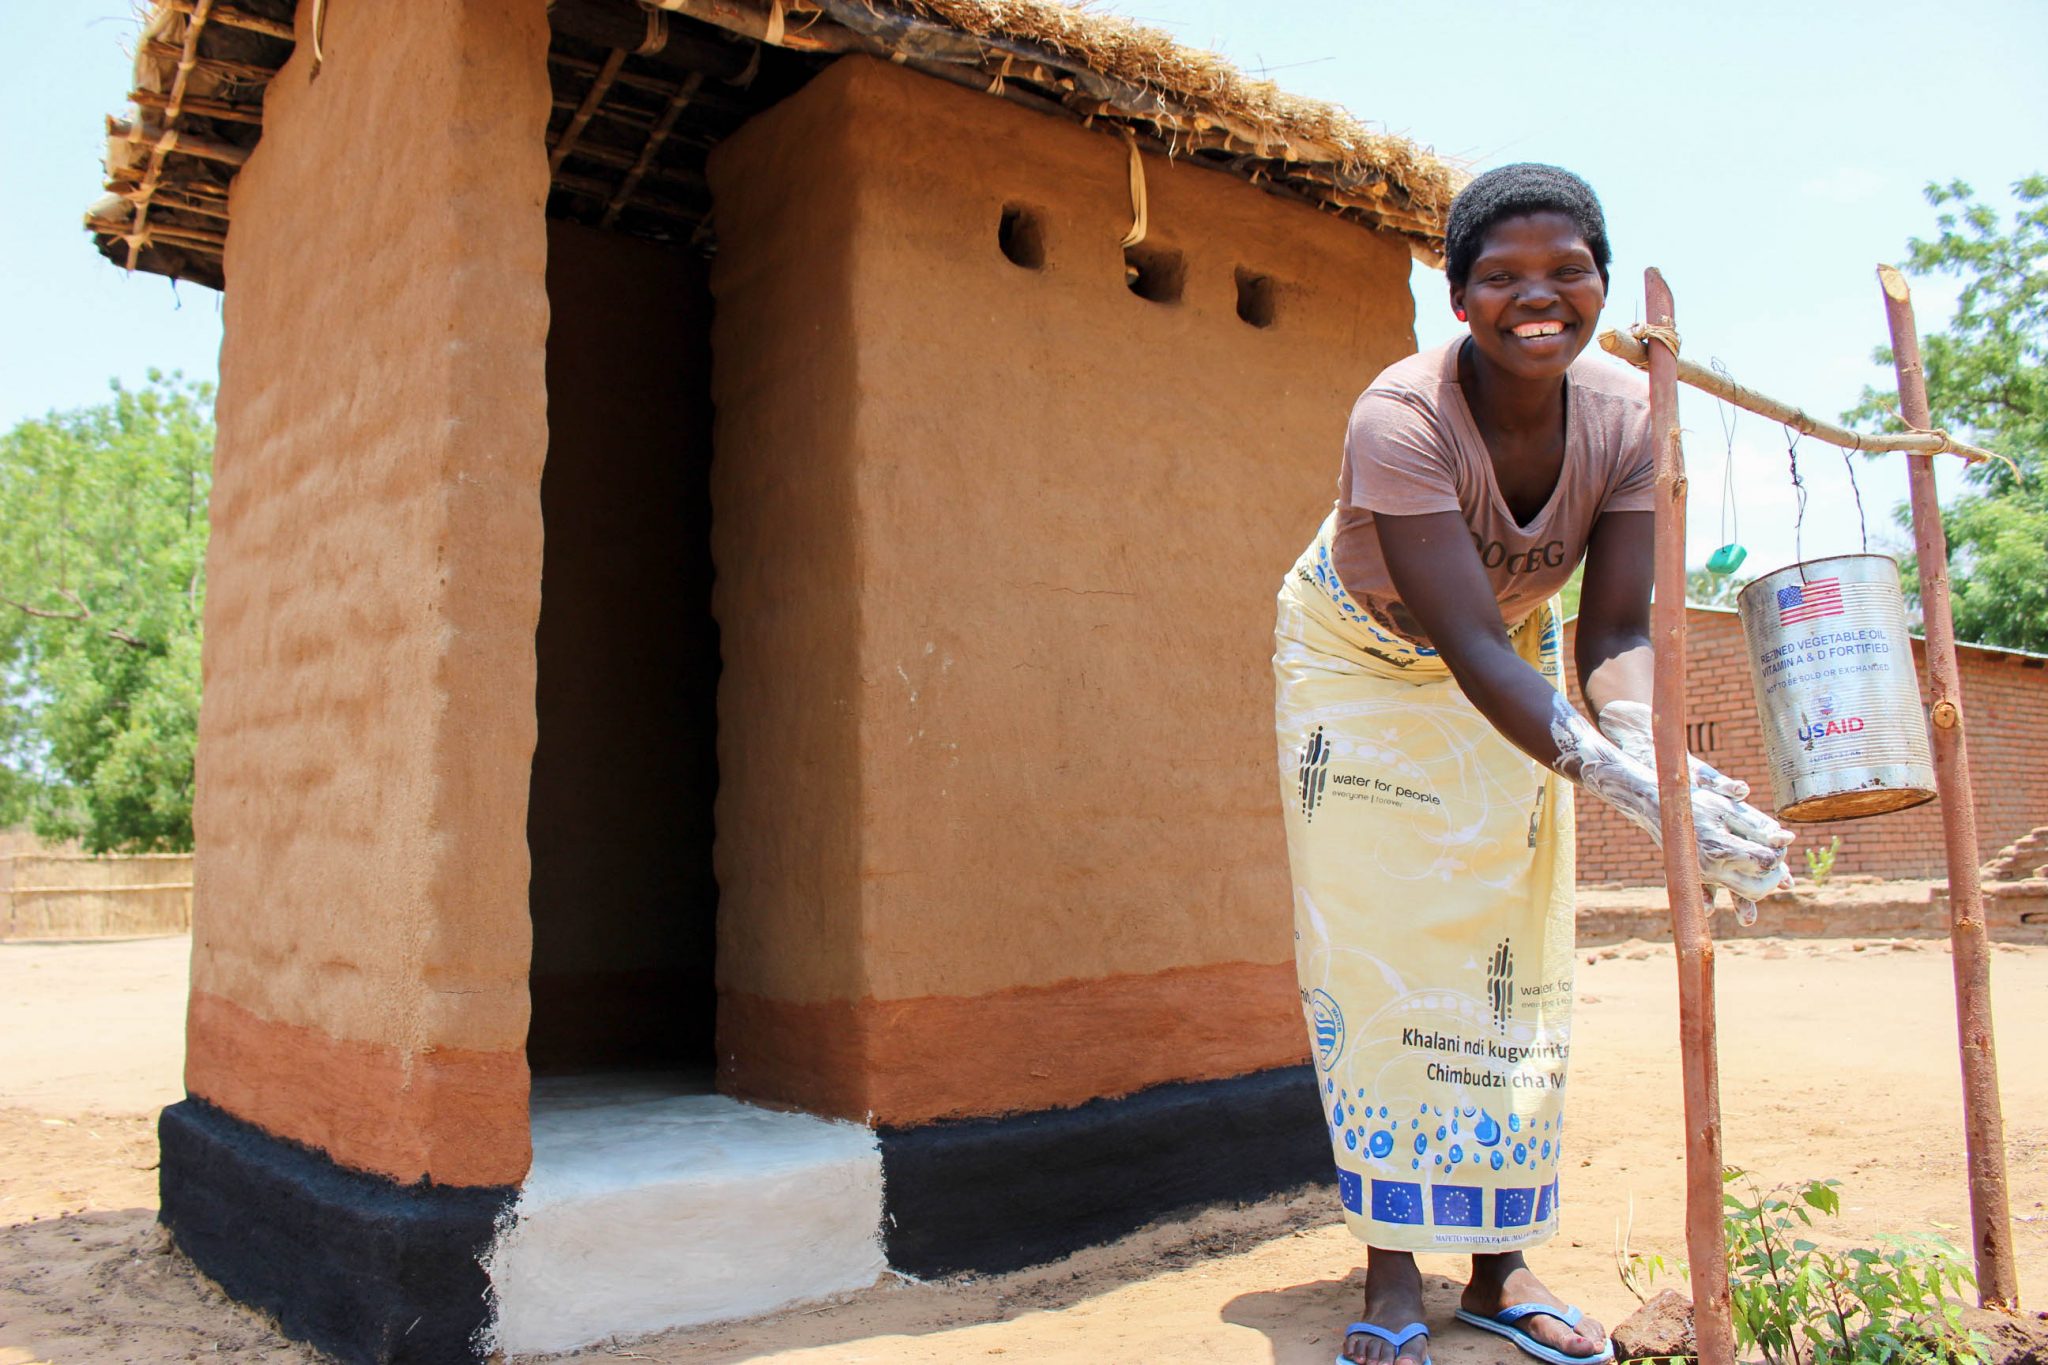 A woman smiles while washing her hands out front of a latrine structure